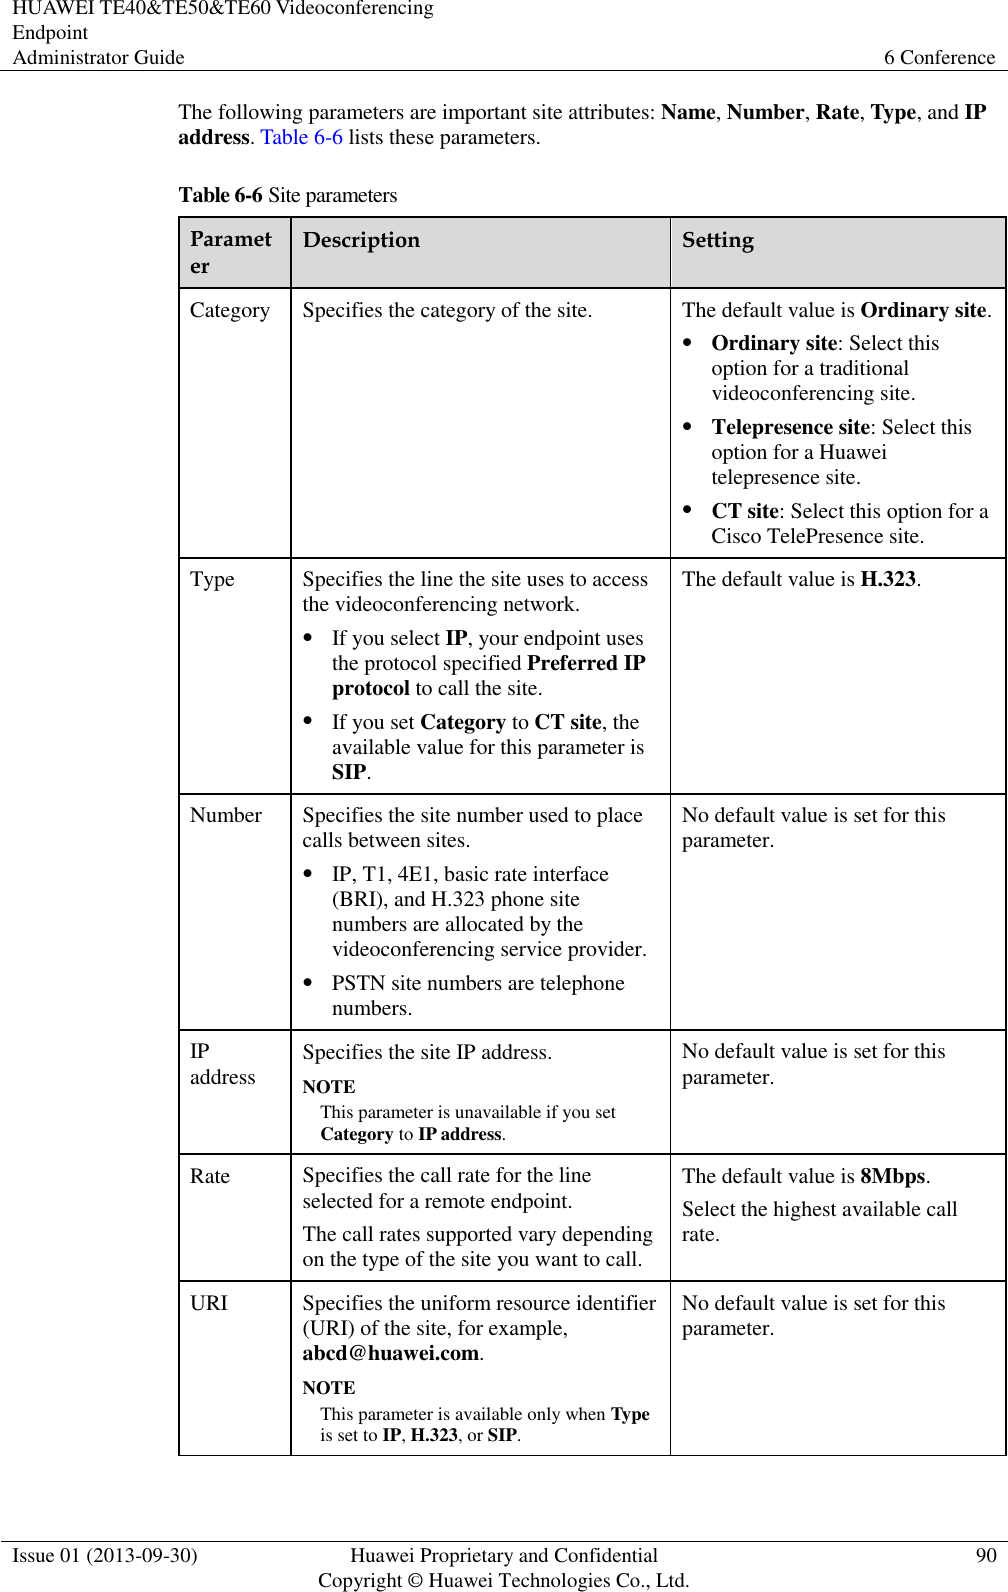 HUAWEI TE40&amp;TE50&amp;TE60 Videoconferencing Endpoint Administrator Guide 6 Conference  Issue 01 (2013-09-30) Huawei Proprietary and Confidential                                     Copyright © Huawei Technologies Co., Ltd. 90  The following parameters are important site attributes: Name, Number, Rate, Type, and IP address. Table 6-6 lists these parameters. Table 6-6 Site parameters Parameter Description Setting Category Specifies the category of the site.   The default value is Ordinary site.  Ordinary site: Select this option for a traditional videoconferencing site.  Telepresence site: Select this option for a Huawei telepresence site.  CT site: Select this option for a Cisco TelePresence site. Type Specifies the line the site uses to access the videoconferencing network.  If you select IP, your endpoint uses the protocol specified Preferred IP protocol to call the site.  If you set Category to CT site, the available value for this parameter is SIP. The default value is H.323. Number Specifies the site number used to place calls between sites.  IP, T1, 4E1, basic rate interface (BRI), and H.323 phone site numbers are allocated by the videoconferencing service provider.  PSTN site numbers are telephone numbers. No default value is set for this parameter. IP address Specifies the site IP address. NOTE This parameter is unavailable if you set Category to IP address. No default value is set for this parameter. Rate Specifies the call rate for the line selected for a remote endpoint.   The call rates supported vary depending on the type of the site you want to call. The default value is 8Mbps.   Select the highest available call rate. URI Specifies the uniform resource identifier (URI) of the site, for example, abcd@huawei.com.   NOTE This parameter is available only when Type is set to IP, H.323, or SIP. No default value is set for this parameter.  